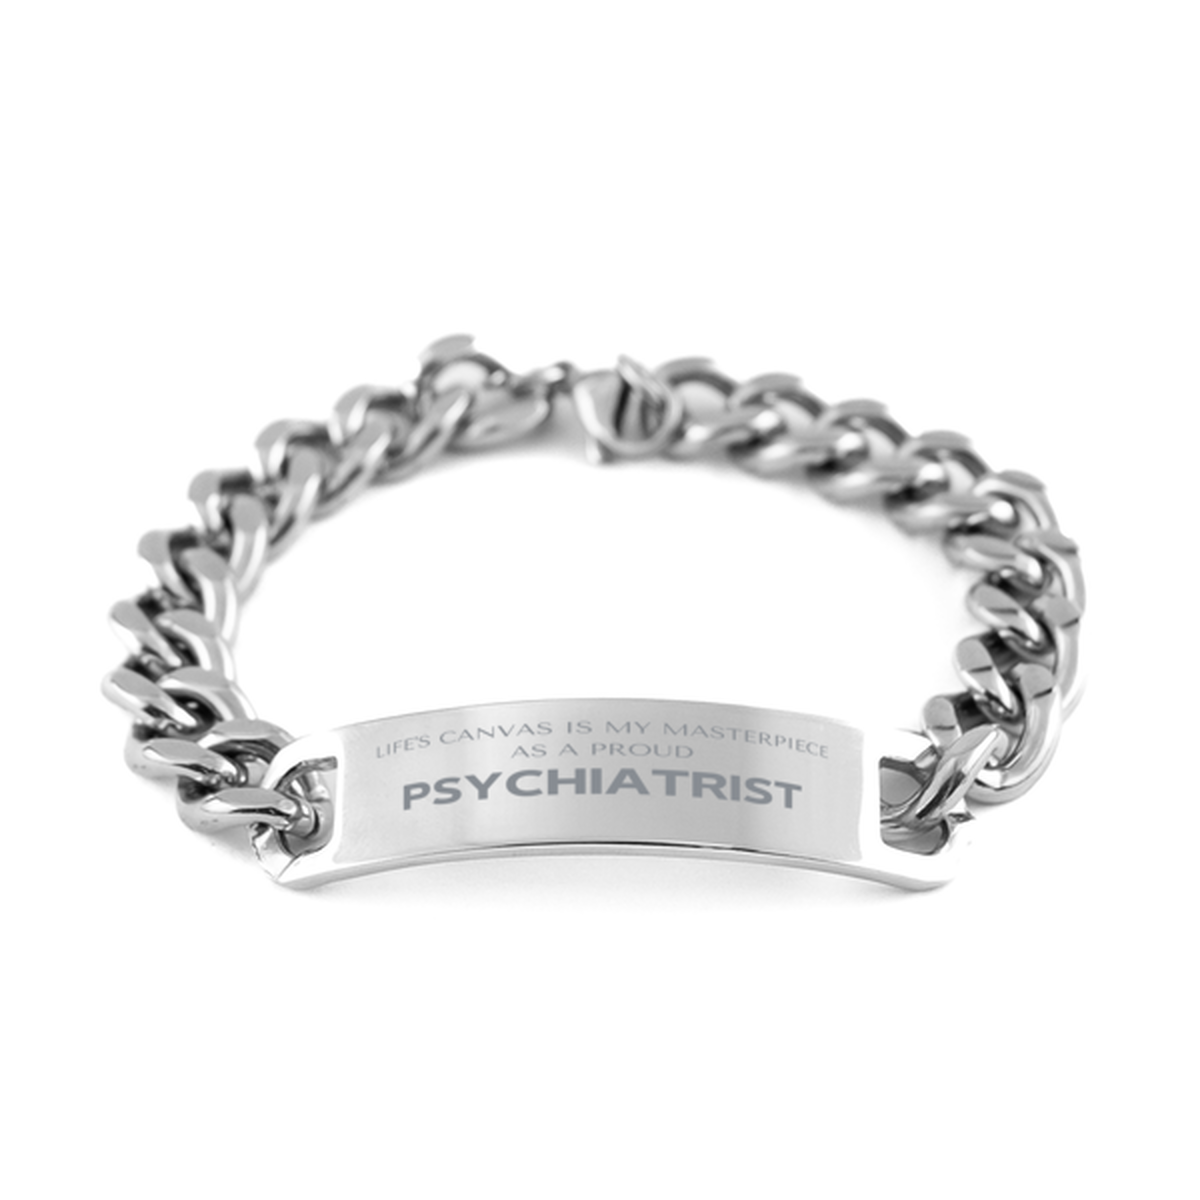 Proud Psychiatrist Gifts, Life's canvas is my masterpiece, Epic Birthday Christmas Unique Cuban Chain Stainless Steel Bracelet For Psychiatrist, Coworkers, Men, Women, Friends